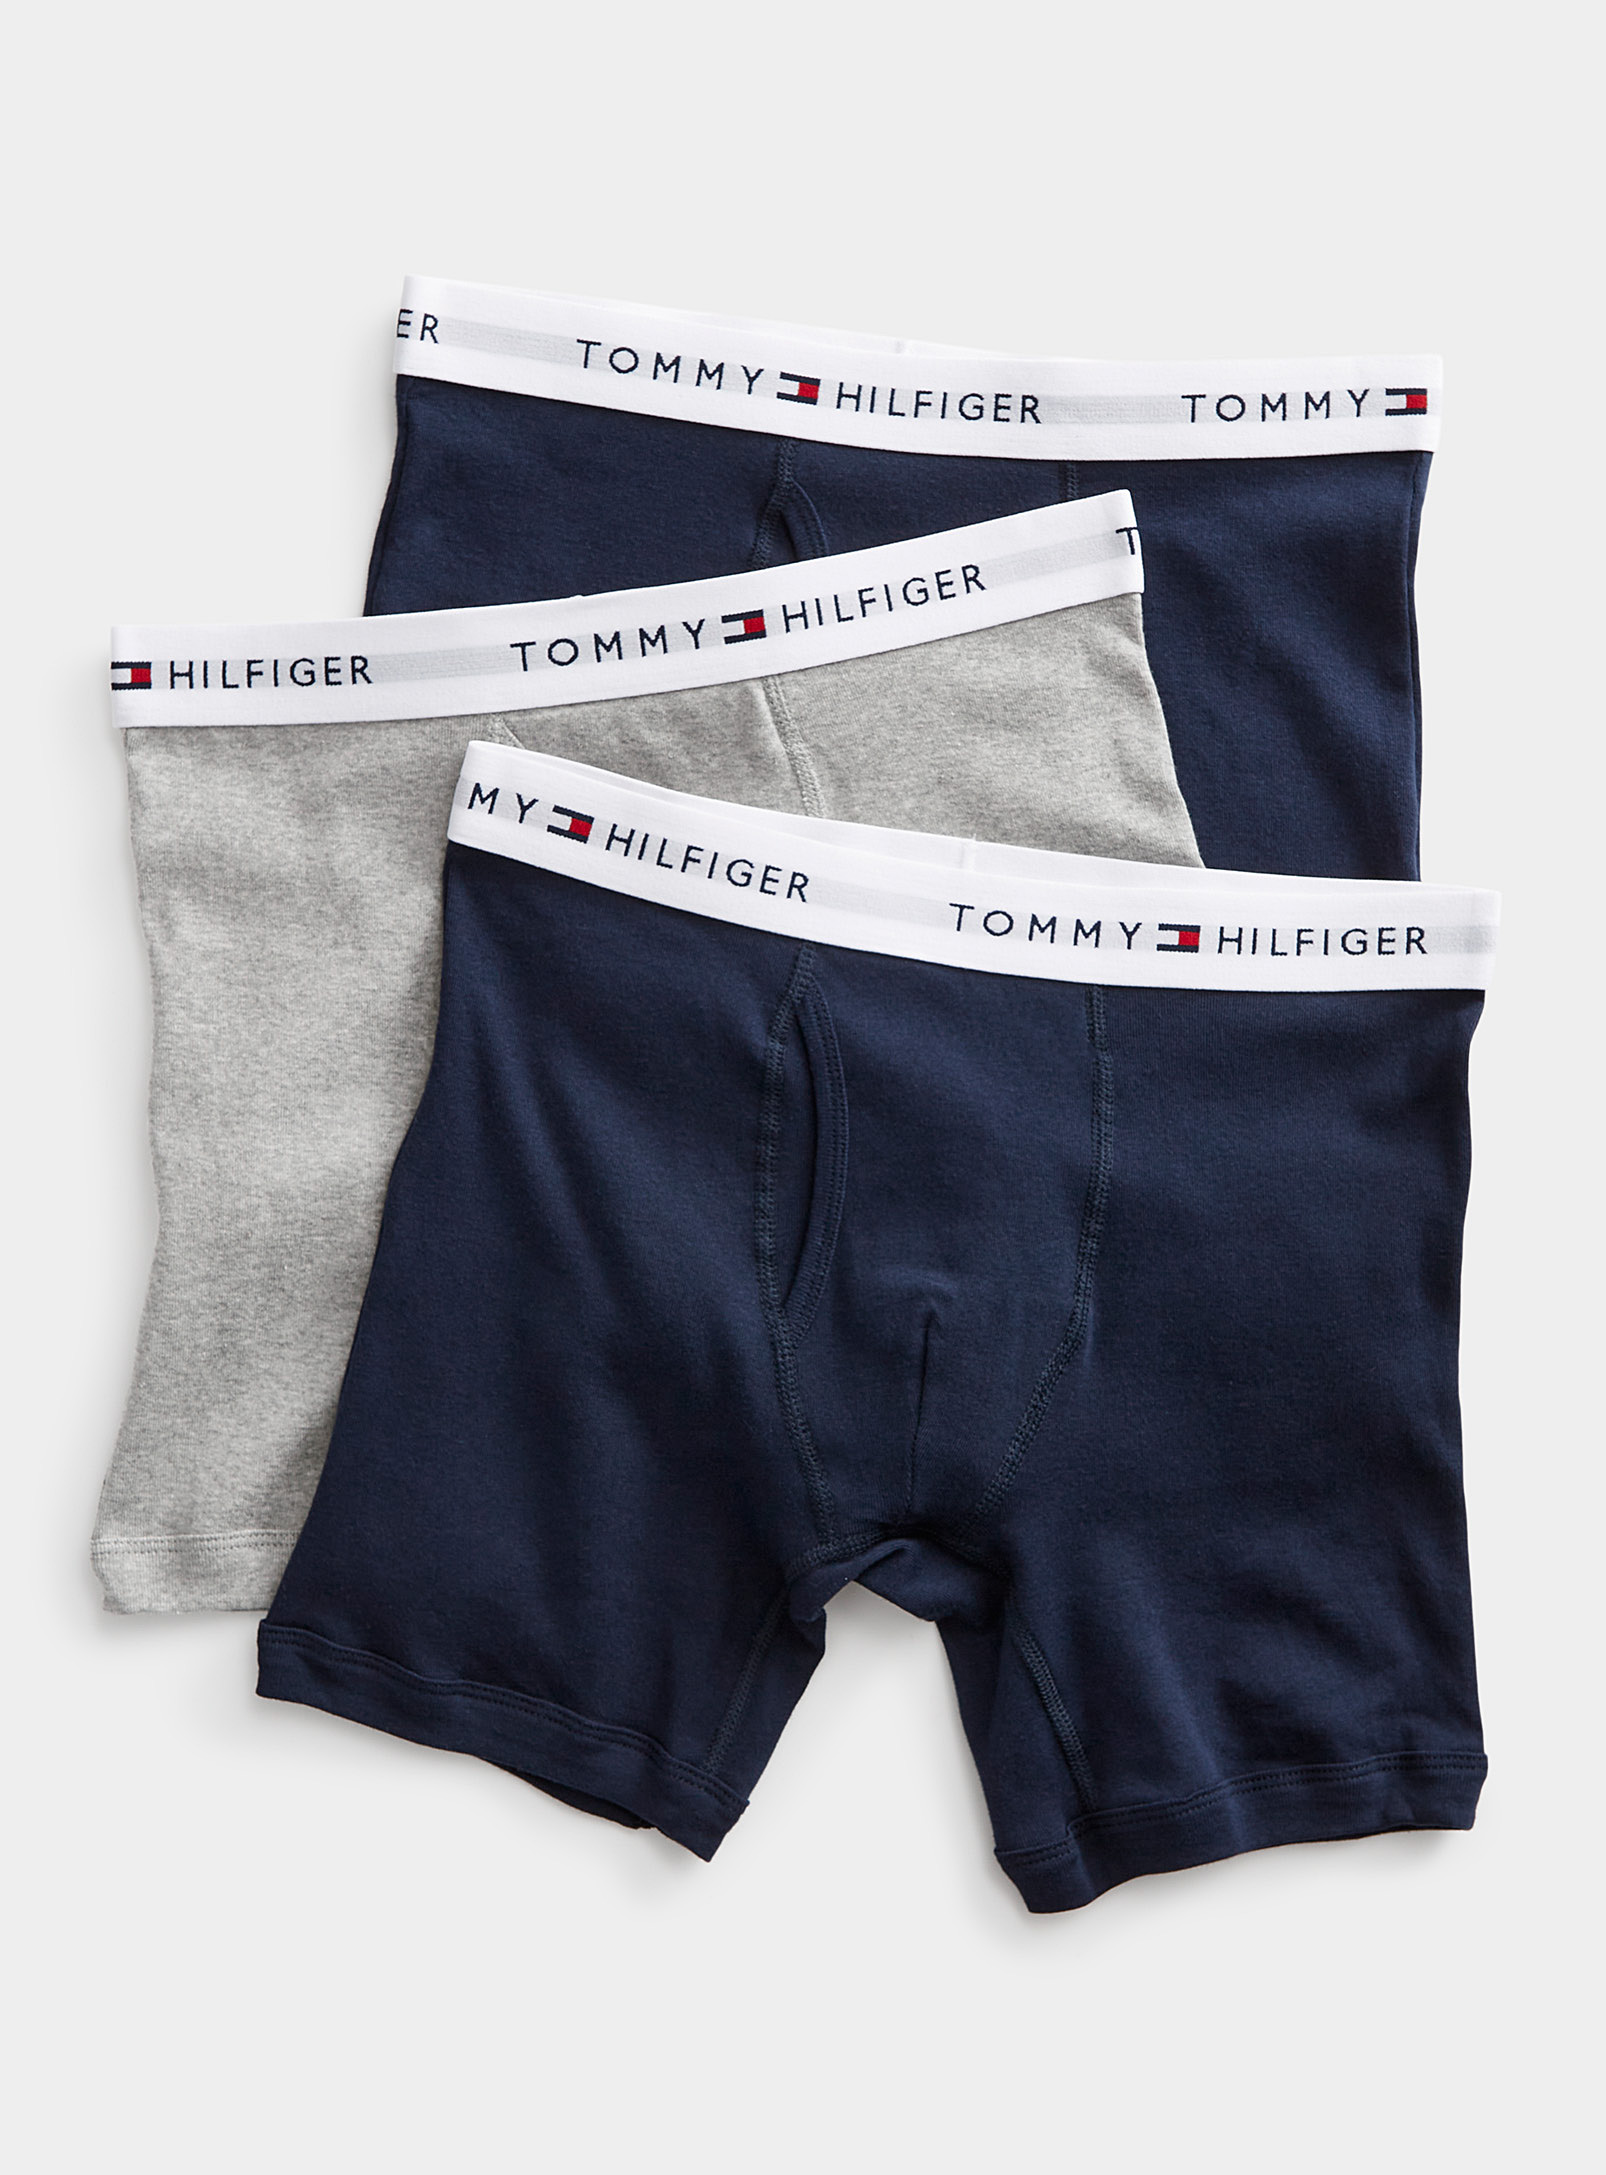 Tommy Hilfiger Cotton Classics Boxer Brief 3-pack In Patterned Blue